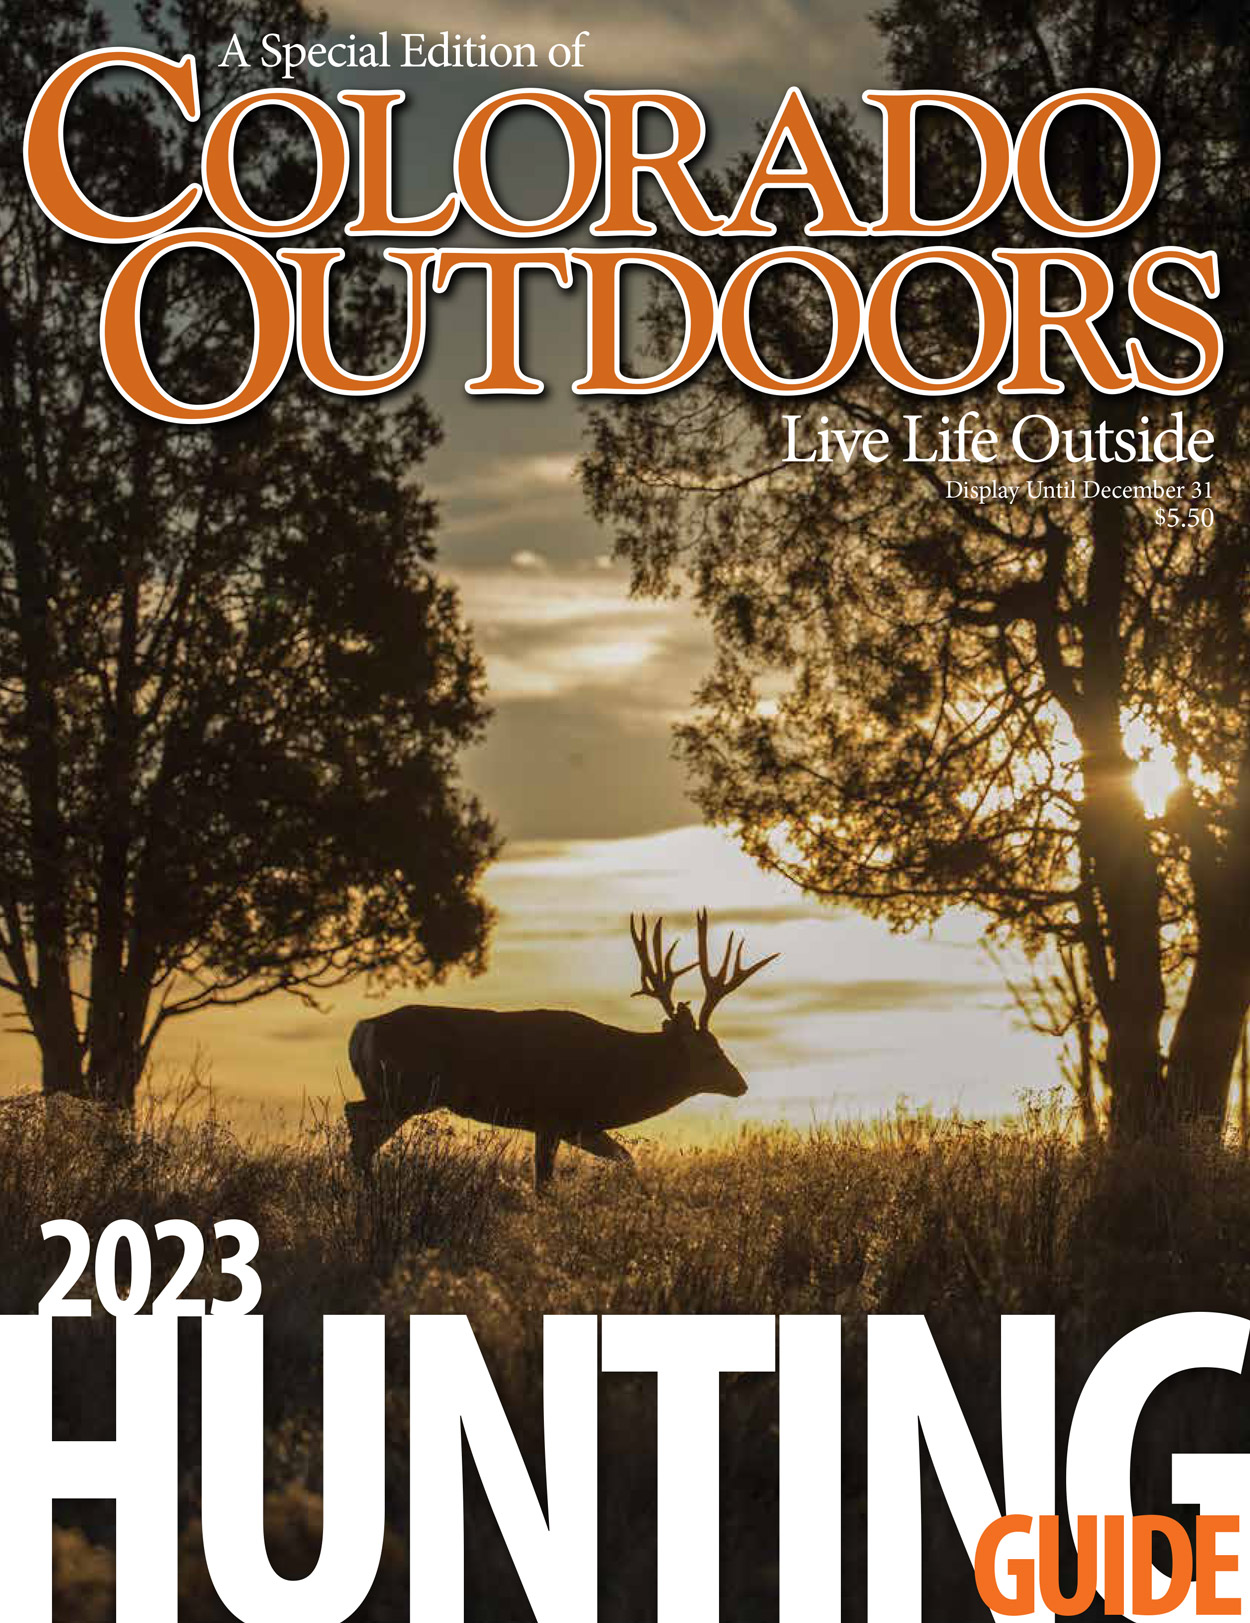 2023 Hunt Guide cover